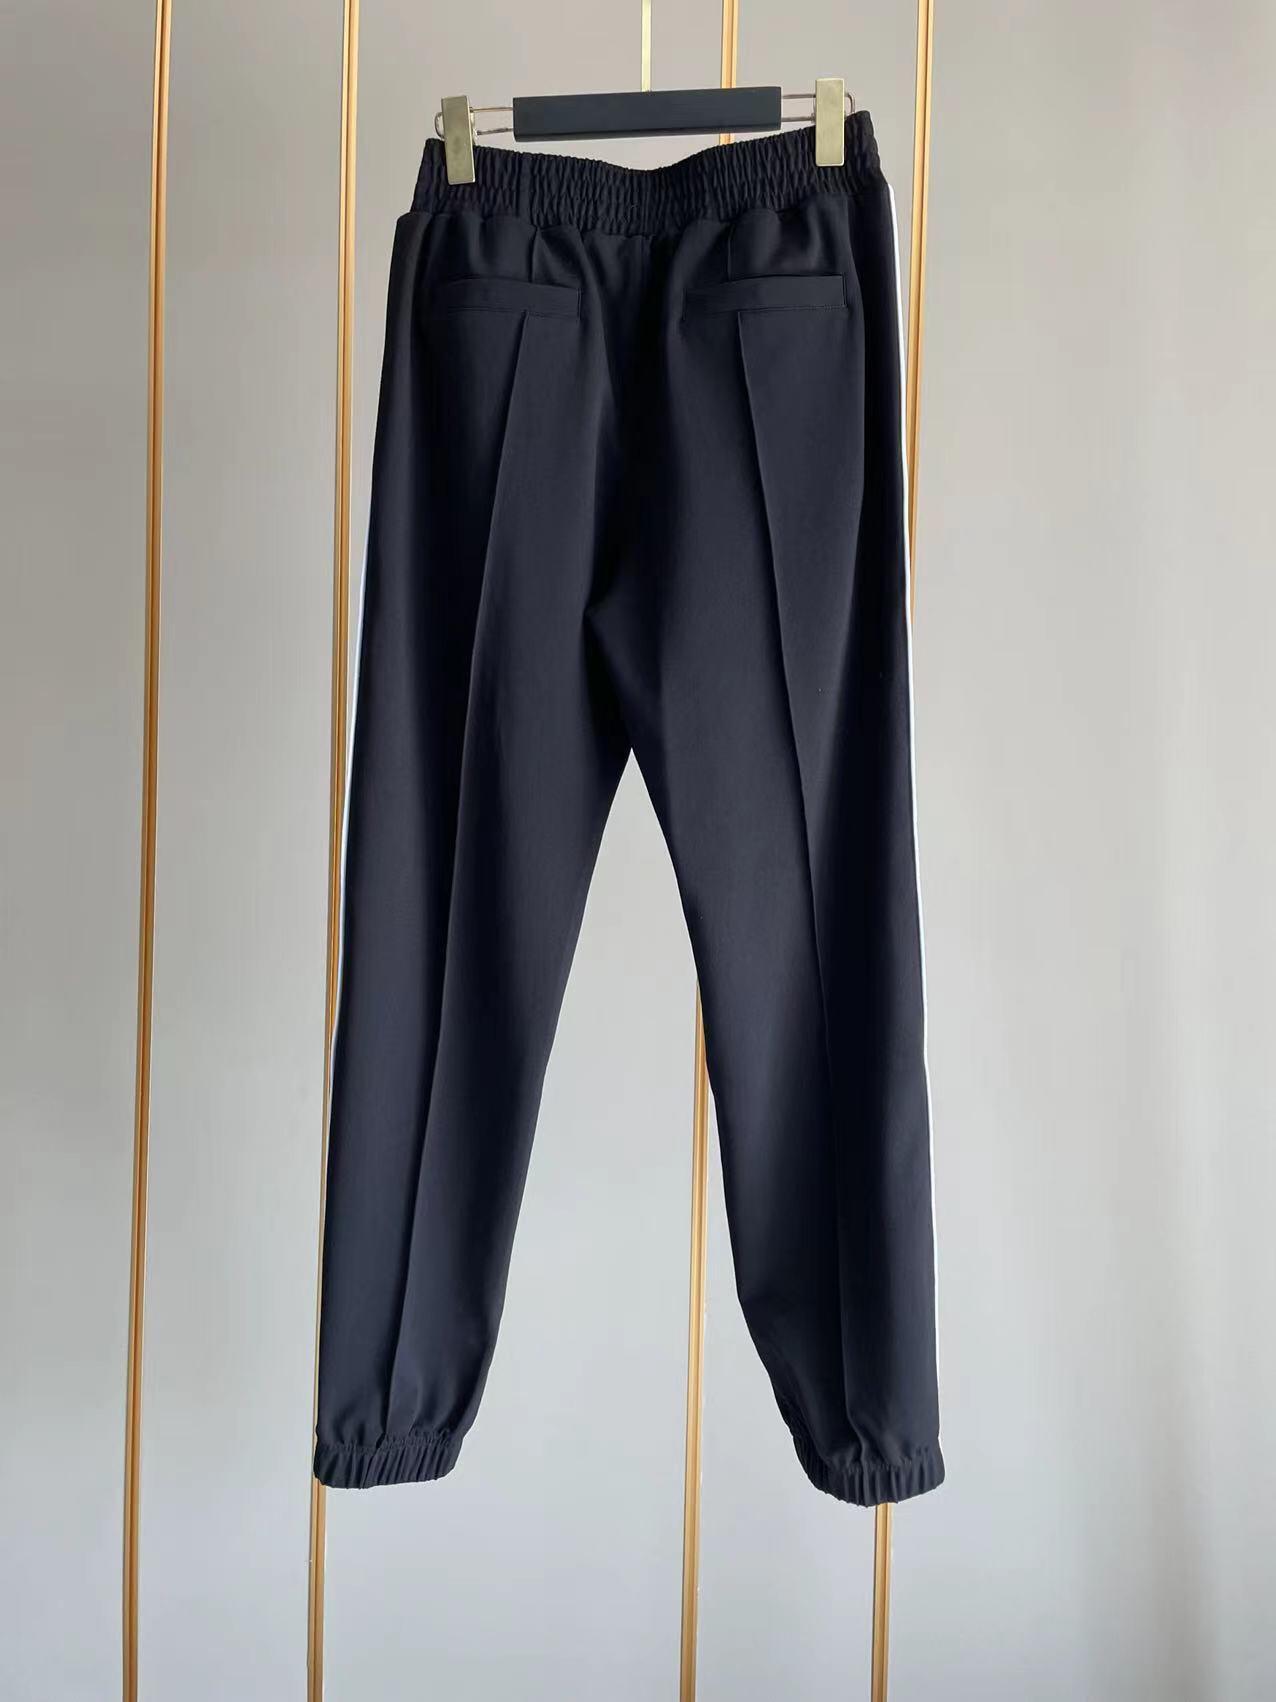 slim-fit-jogger-pants-in-jersey-with-givenchy-bands-6628_16845014243-1000